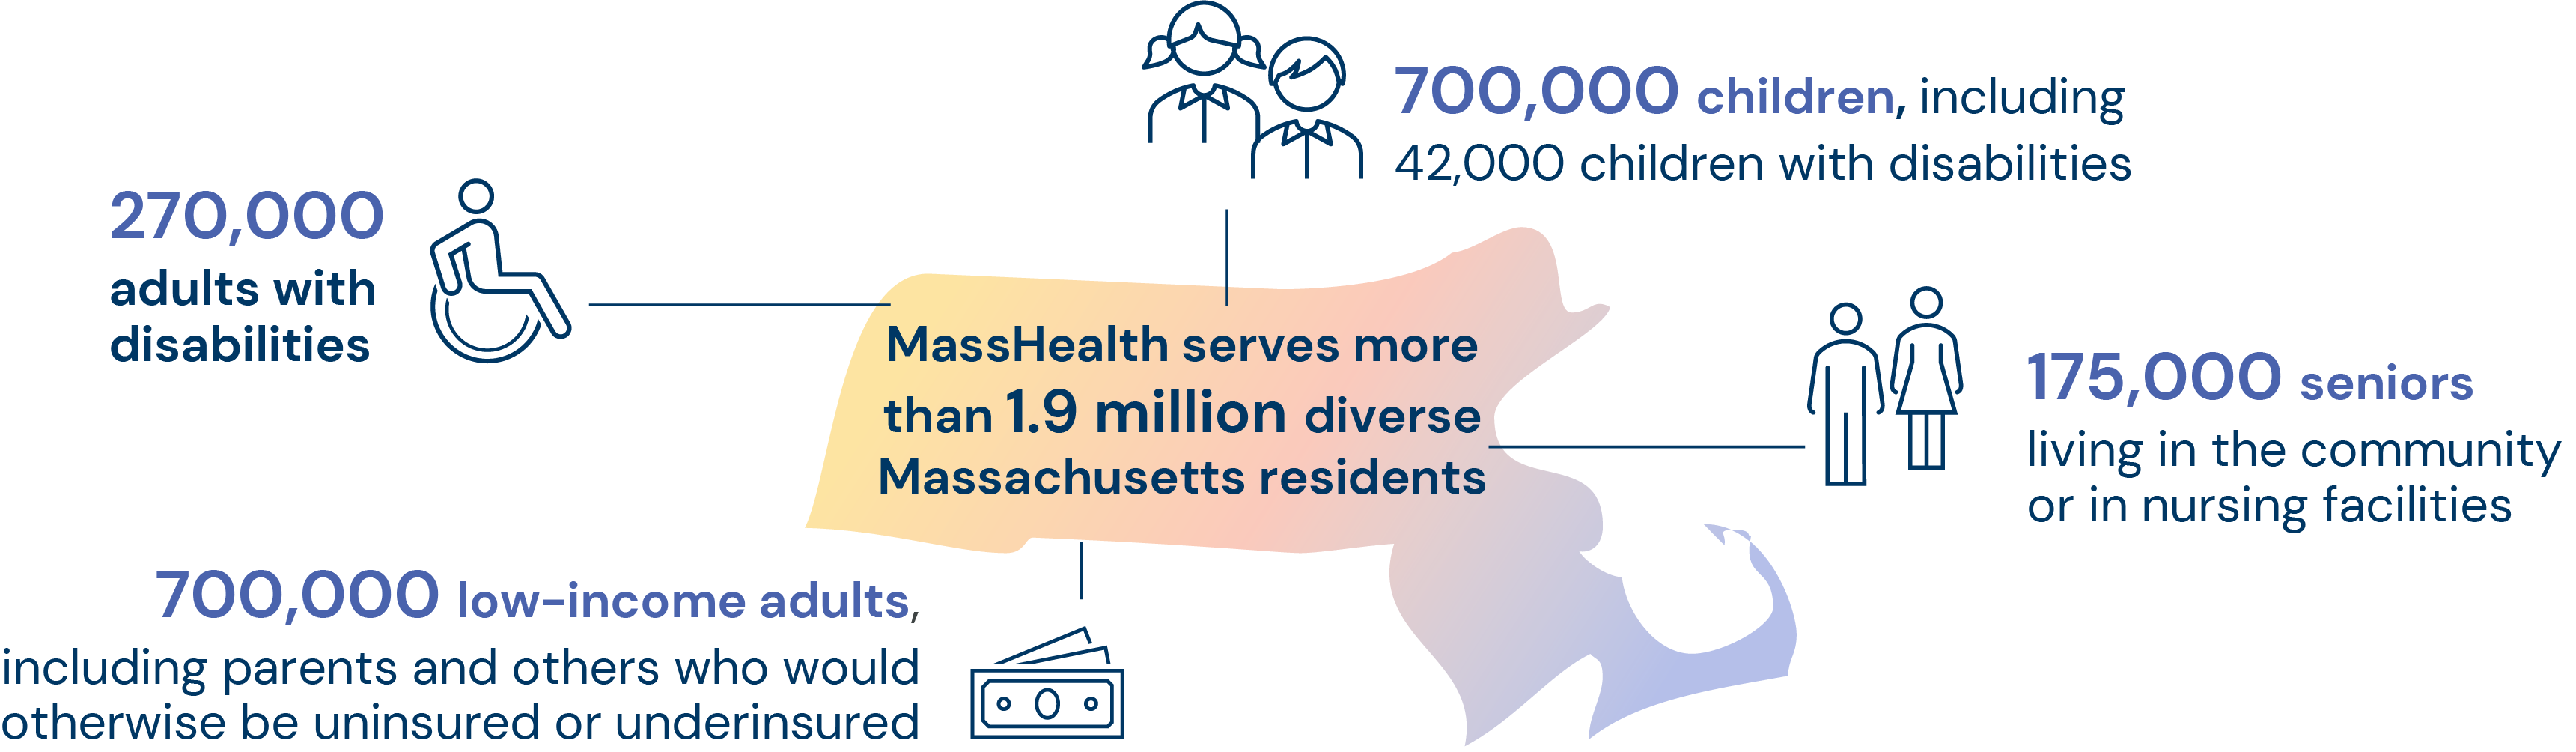 Infographic: MassHealth serves more than 1.9 million diverse Massachusetts residents (700k children, including 42k children with disabilities; 175k seniors living in the community or in nursing facilities; 700k low-income adults, including parents and others who would otherwise be uninsured or underinsured; 270k adults with disabilities